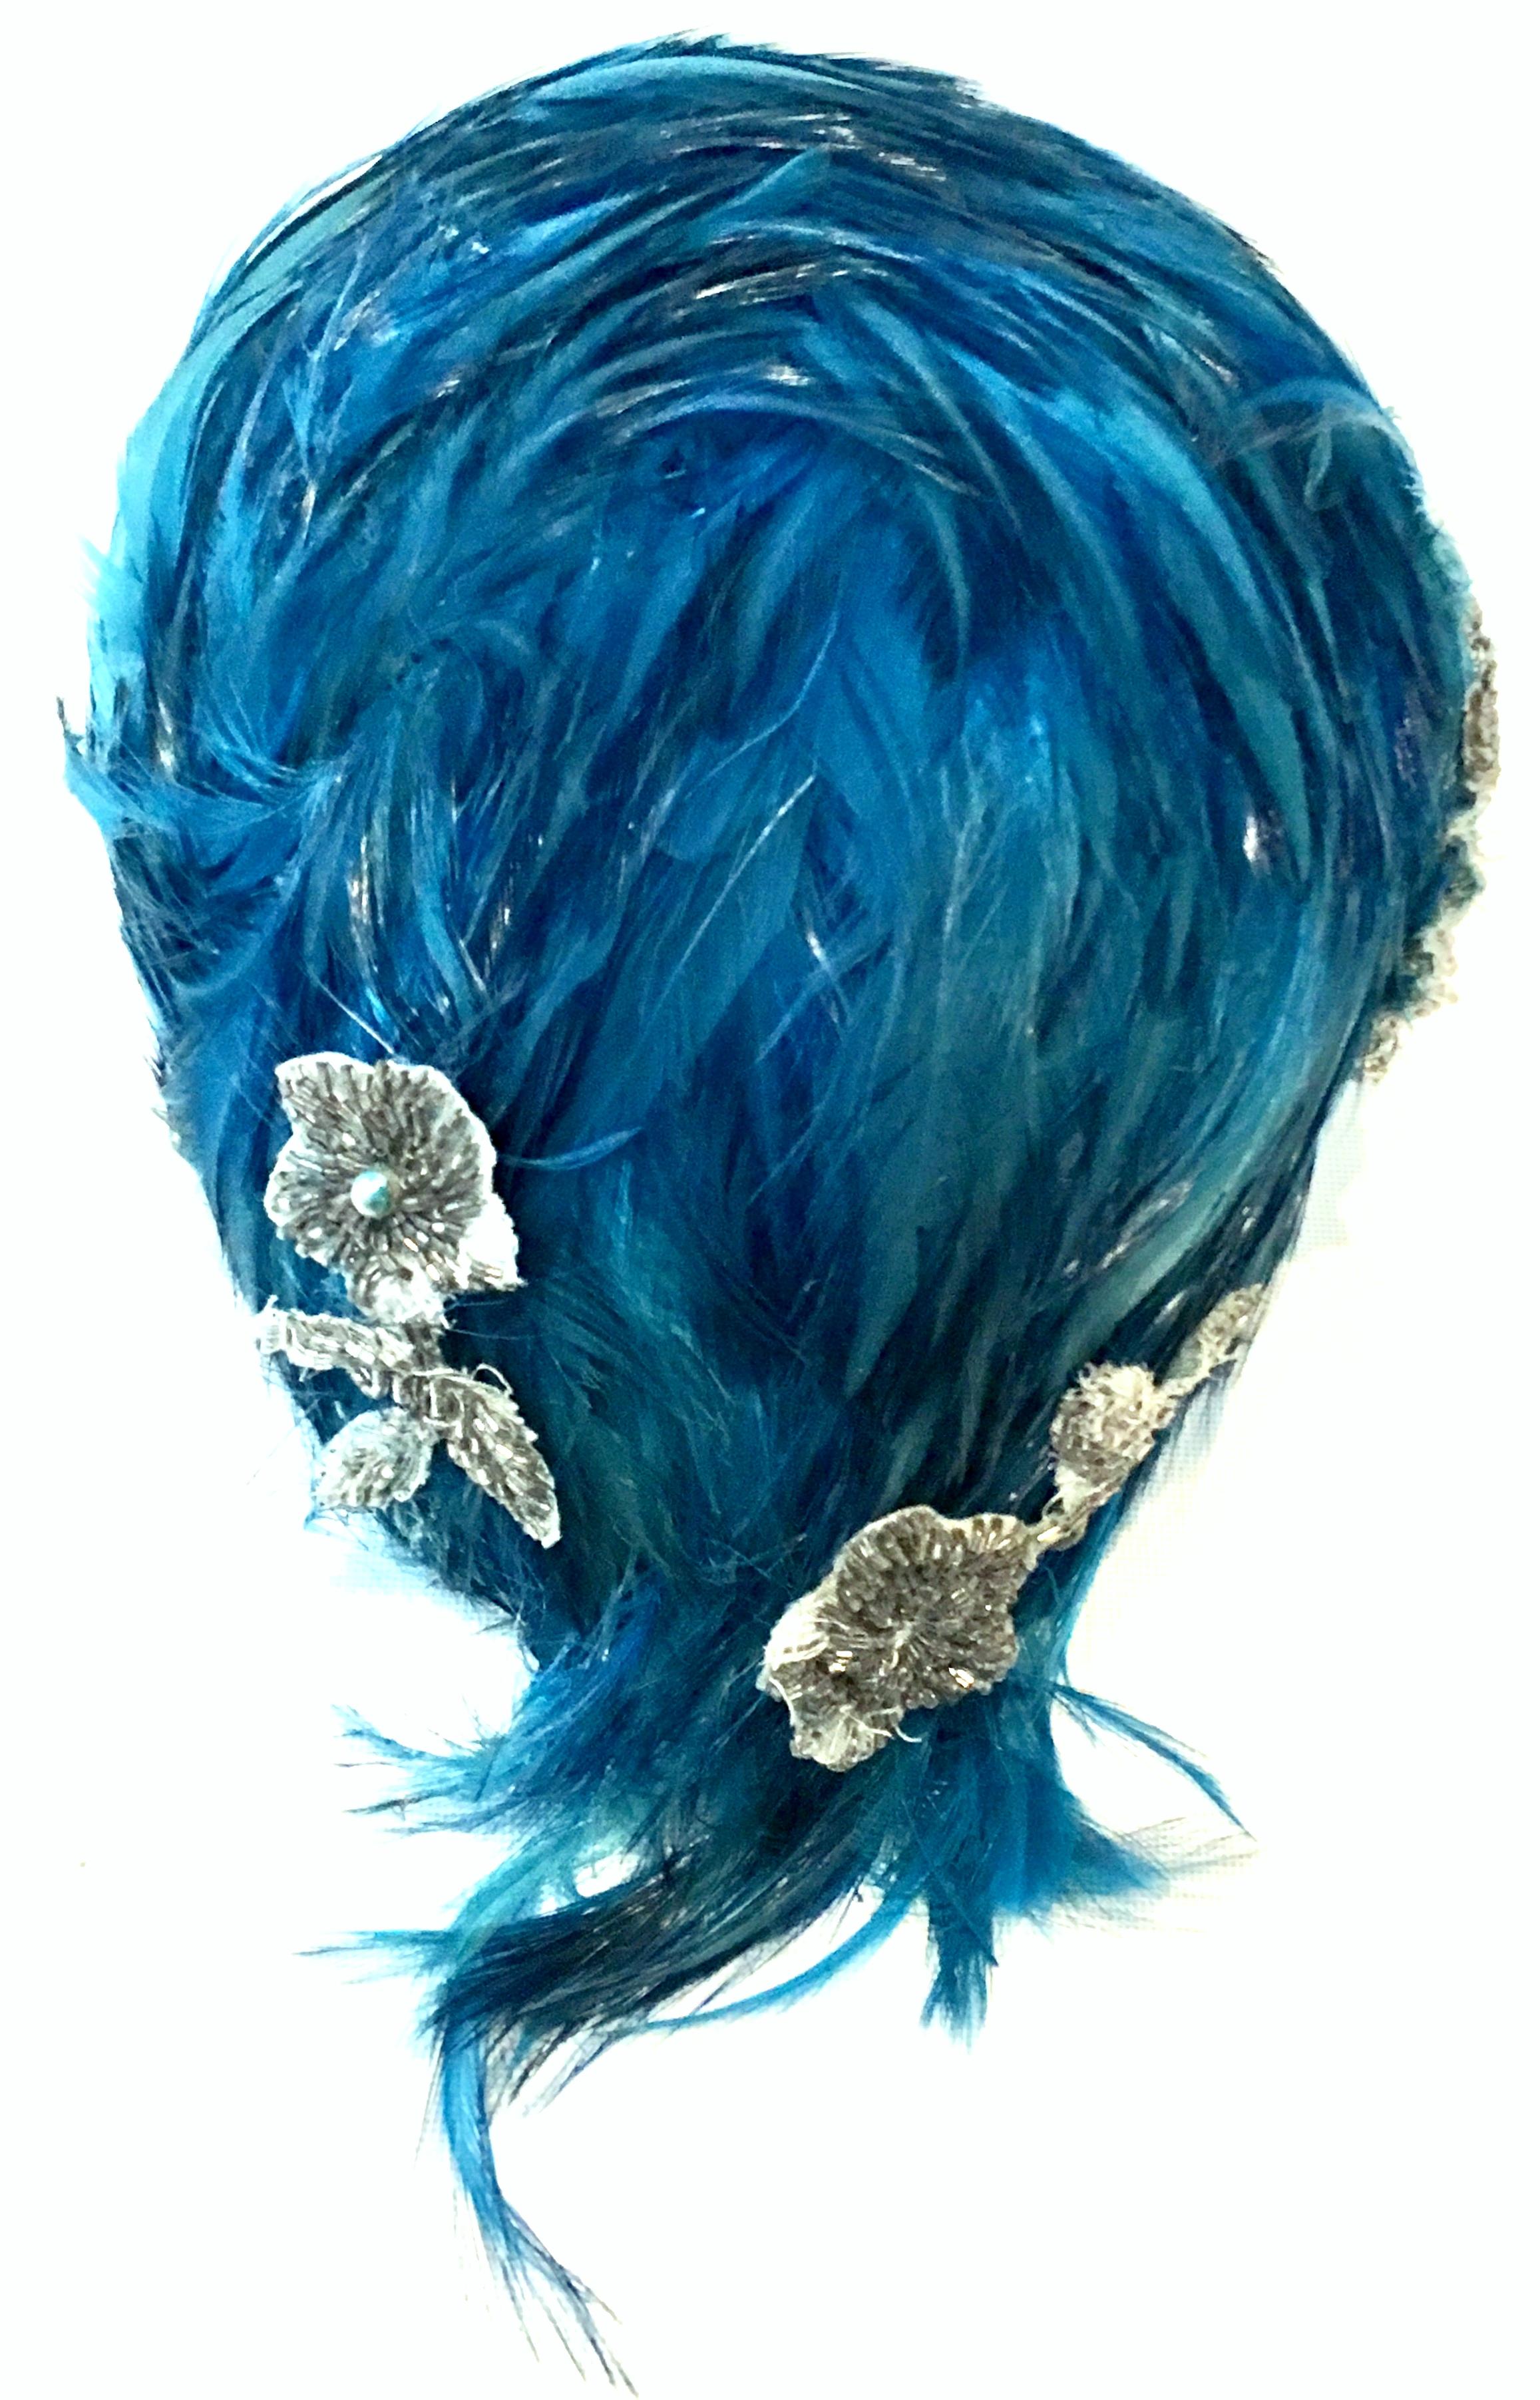 Blue Mid-20th Century Christian Dior French Ostrich Feather & Beaded Applique Hat For Sale